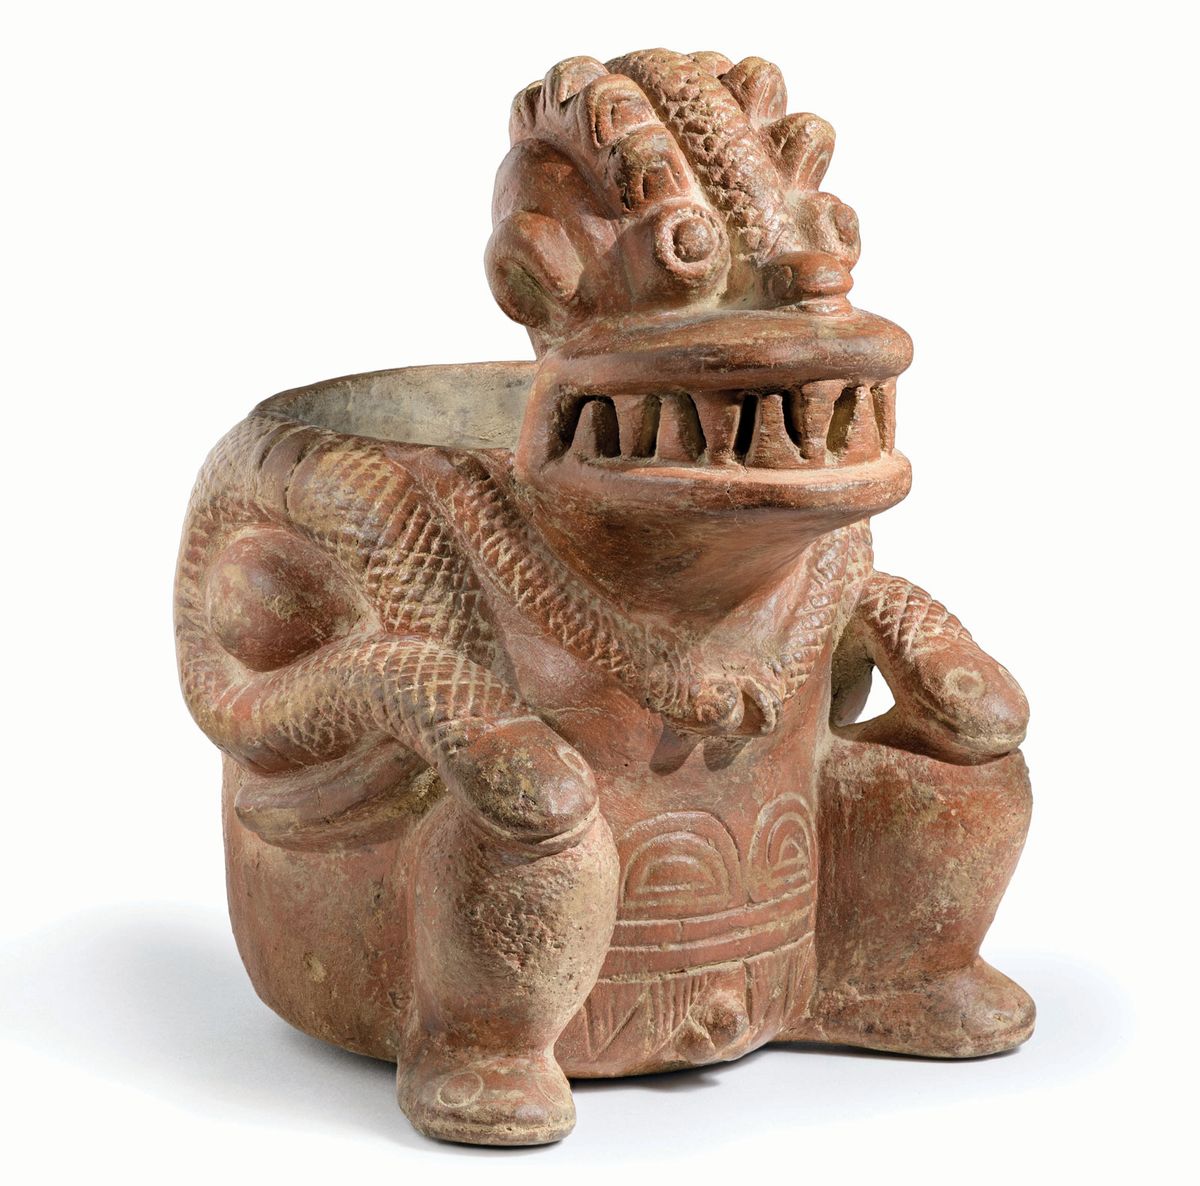 A basket carrier (canastero) with fangs and serpents (1500BC–AD100) from the Calima region of Colombia Photo: © Museum Associates/Lacma